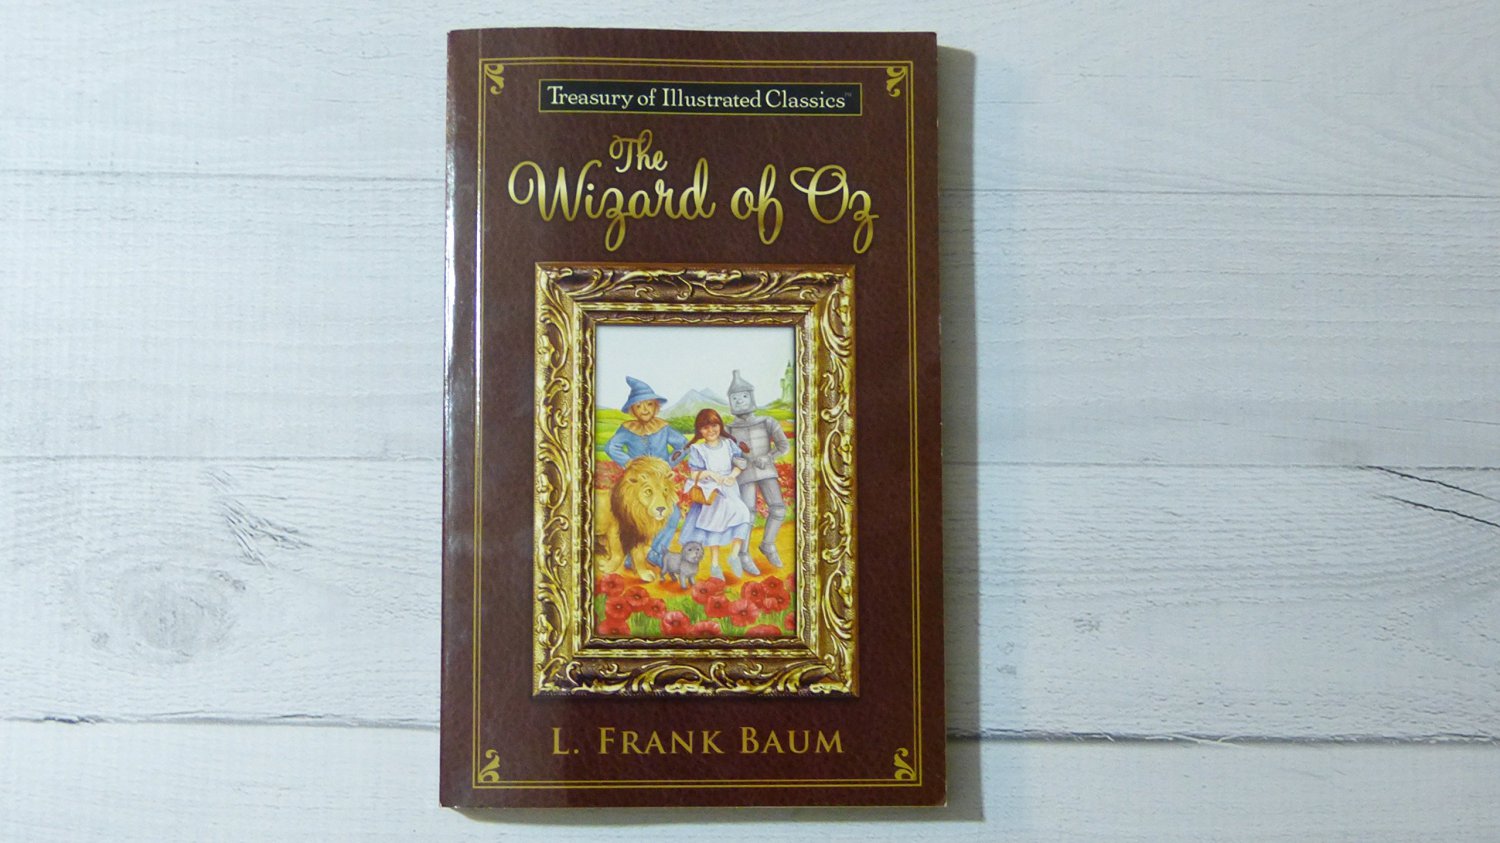 Treasury of Illustrated Classics, The Wizard of Oz